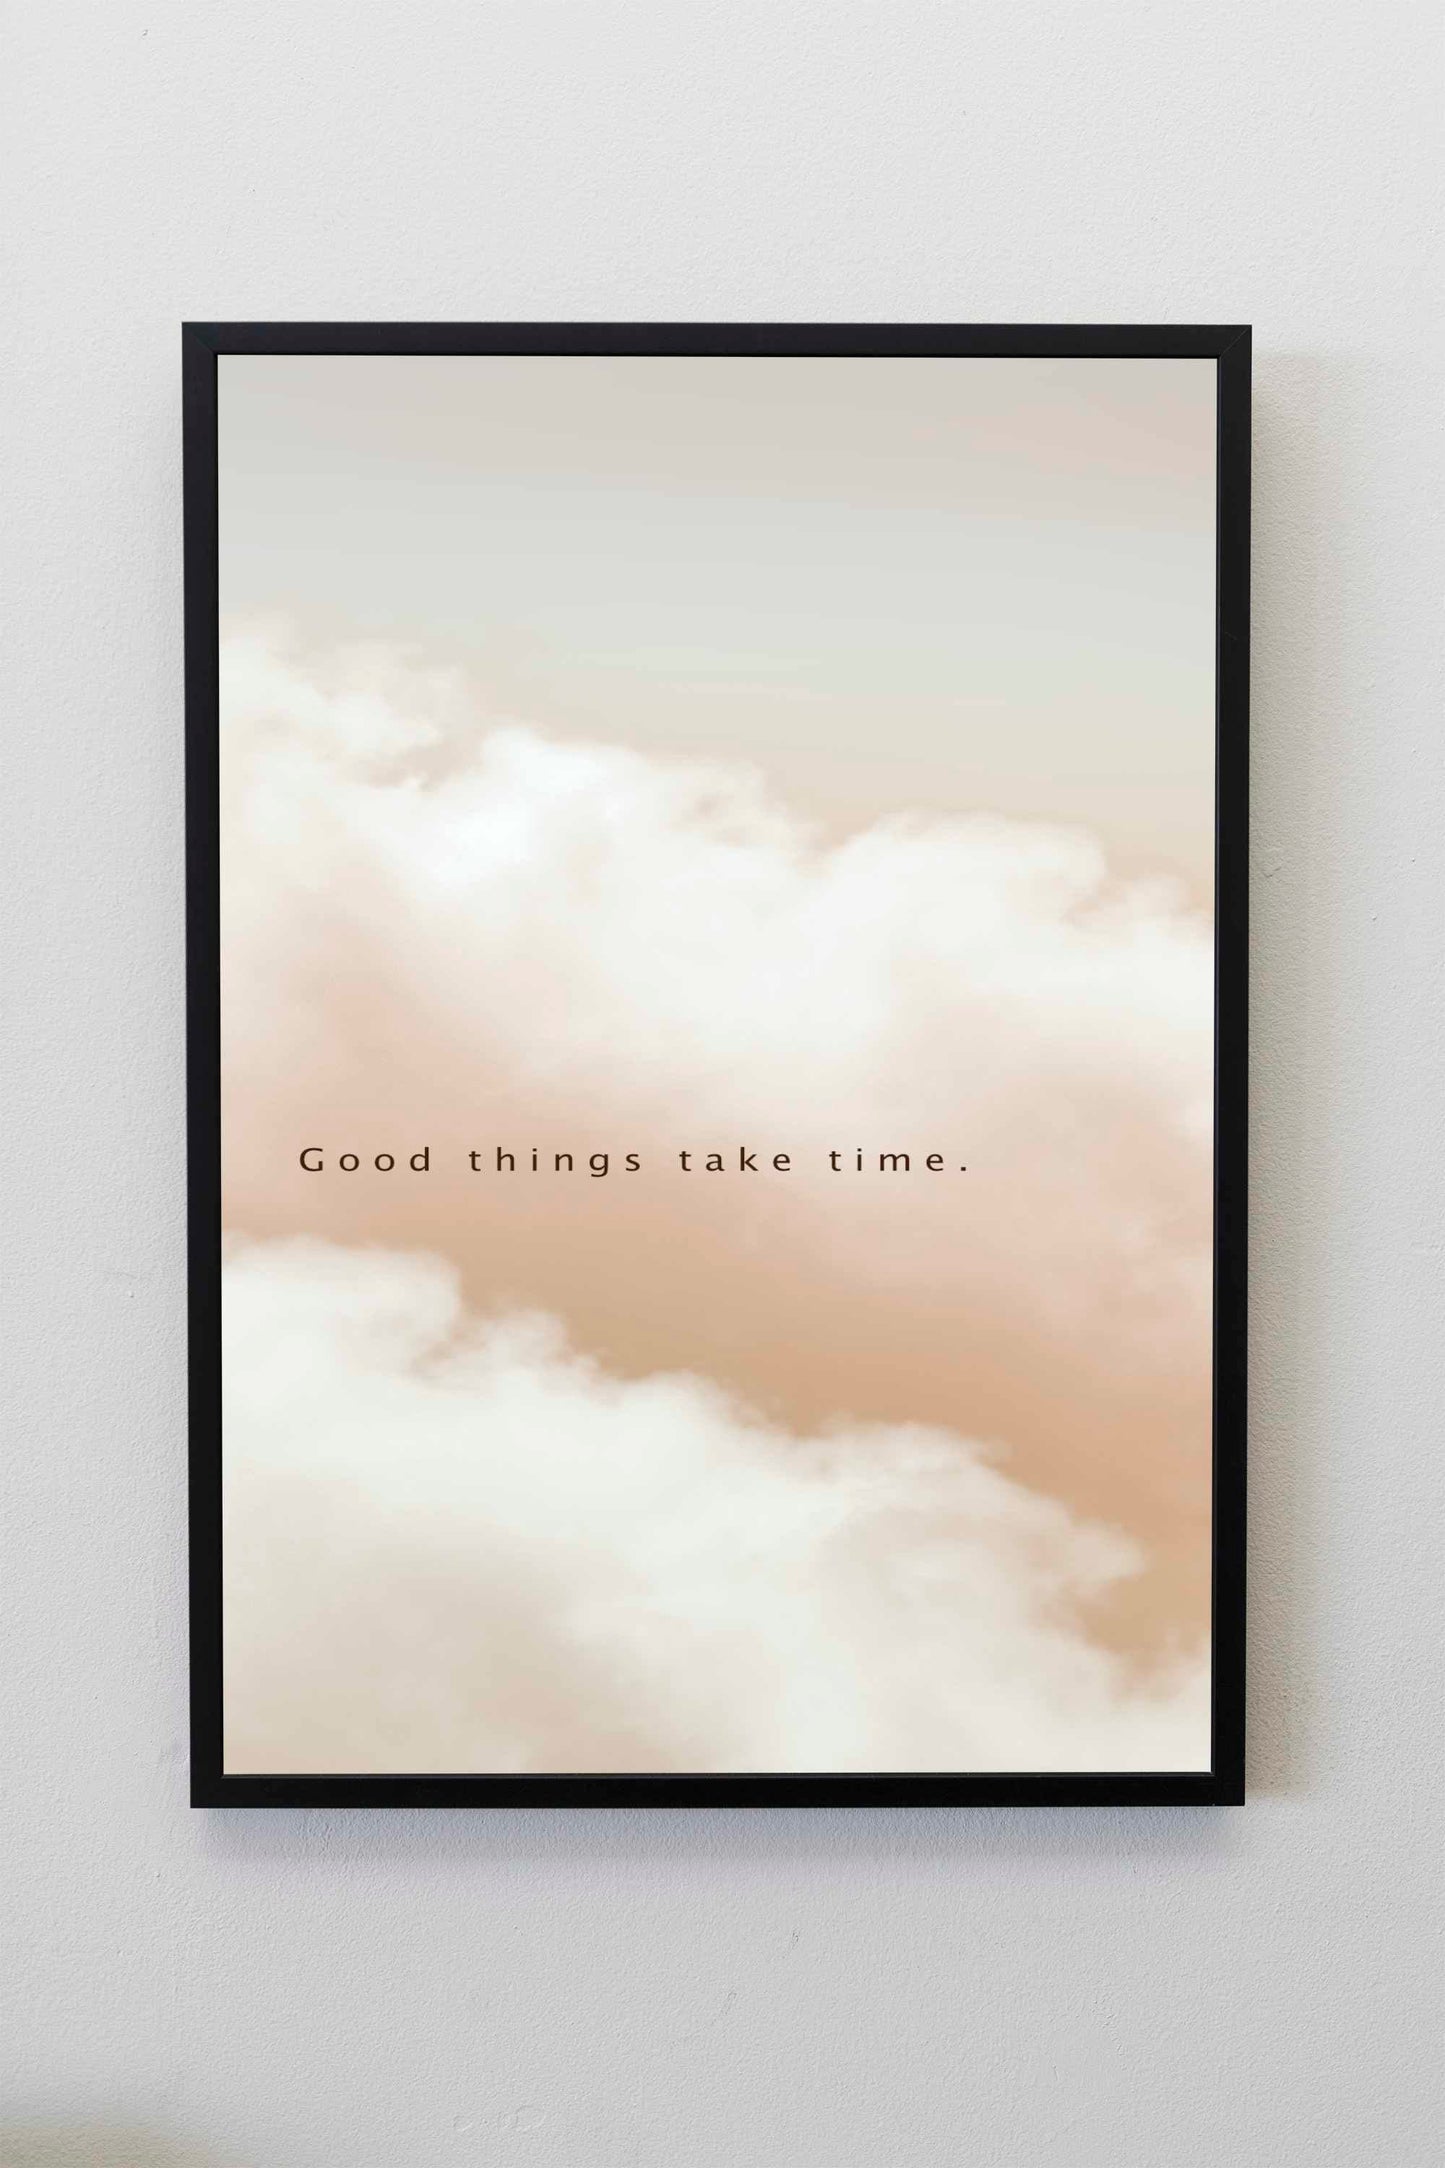 Good things take time Quote Poster | Motivational Prints | Inspirational Quotes | Positive Quote Wall Art | Aesthetic Bedroom Decor